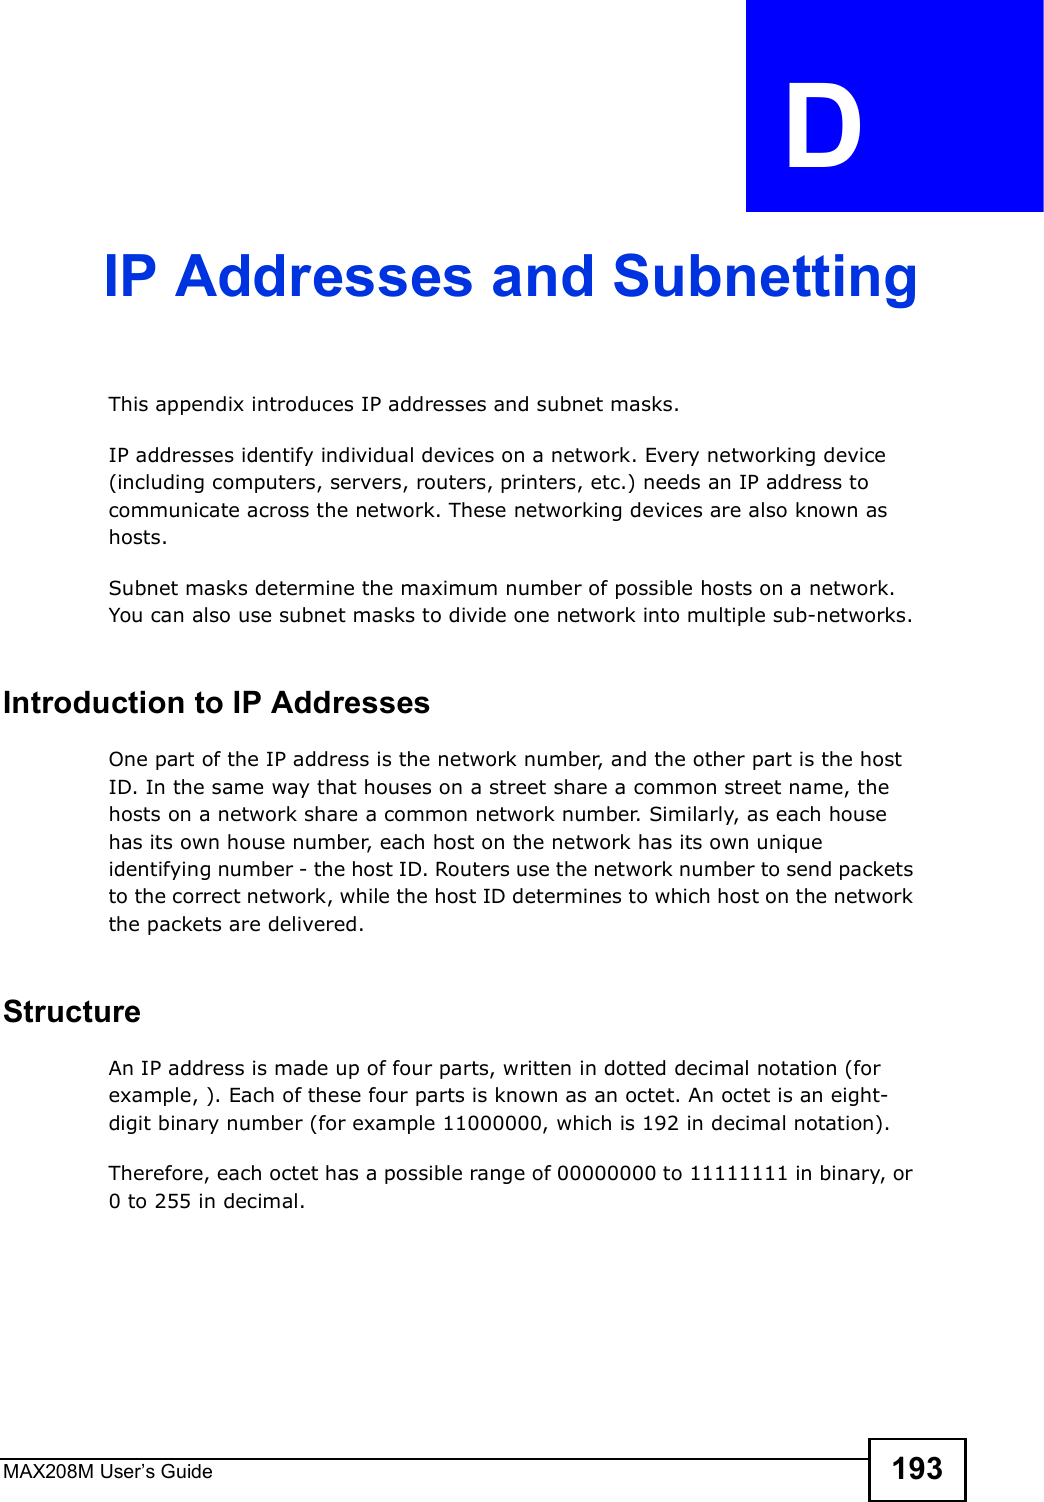 MAX208M User s Guide 193APPENDIX  D IP Addresses and SubnettingThis appendix introduces IP addresses and subnet masks. IP addresses identify individual devices on a network. Every networking device (including computers, servers, routers, printers, etc.) needs an IP address to communicate across the network. These networking devices are also known as hosts.Subnet masks determine the maximum number of possible hosts on a network. You can also use subnet masks to divide one network into multiple sub-networks.Introduction to IP AddressesOne part of the IP address is the network number, and the other part is the host ID. In the same way that houses on a street share a common street name, the hosts on a network share a common network number. Similarly, as each house has its own house number, each host on the network has its own unique identifying number - the host ID. Routers use the network number to send packets to the correct network, while the host ID determines to which host on the network the packets are delivered.StructureAn IP address is made up of four parts, written in dotted decimal notation (for example, ). Each of these four parts is known as an octet. An octet is an eight-digit binary number (for example 11000000, which is 192 in decimal notation). Therefore, each octet has a possible range of 00000000 to 11111111 in binary, or 0 to 255 in decimal.